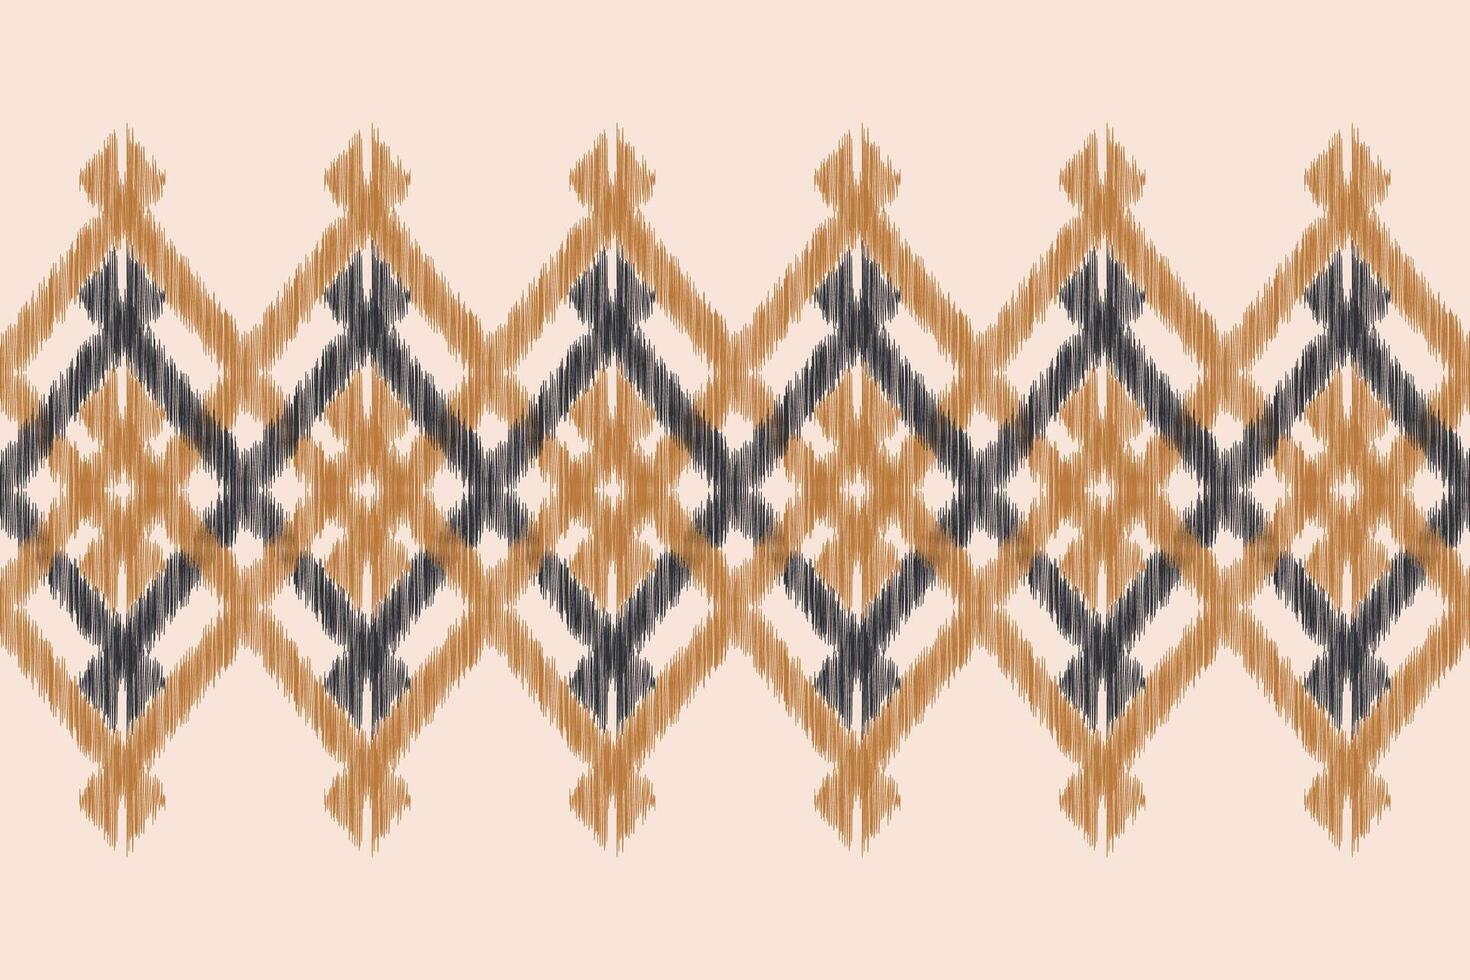 Traditional Ethnic ikat motif fabric pattern background geometric .African Ikat embroidery Ethnic pattern brown cream background wallpaper. Abstract,,illustration.Texture,frame,decoration. vector